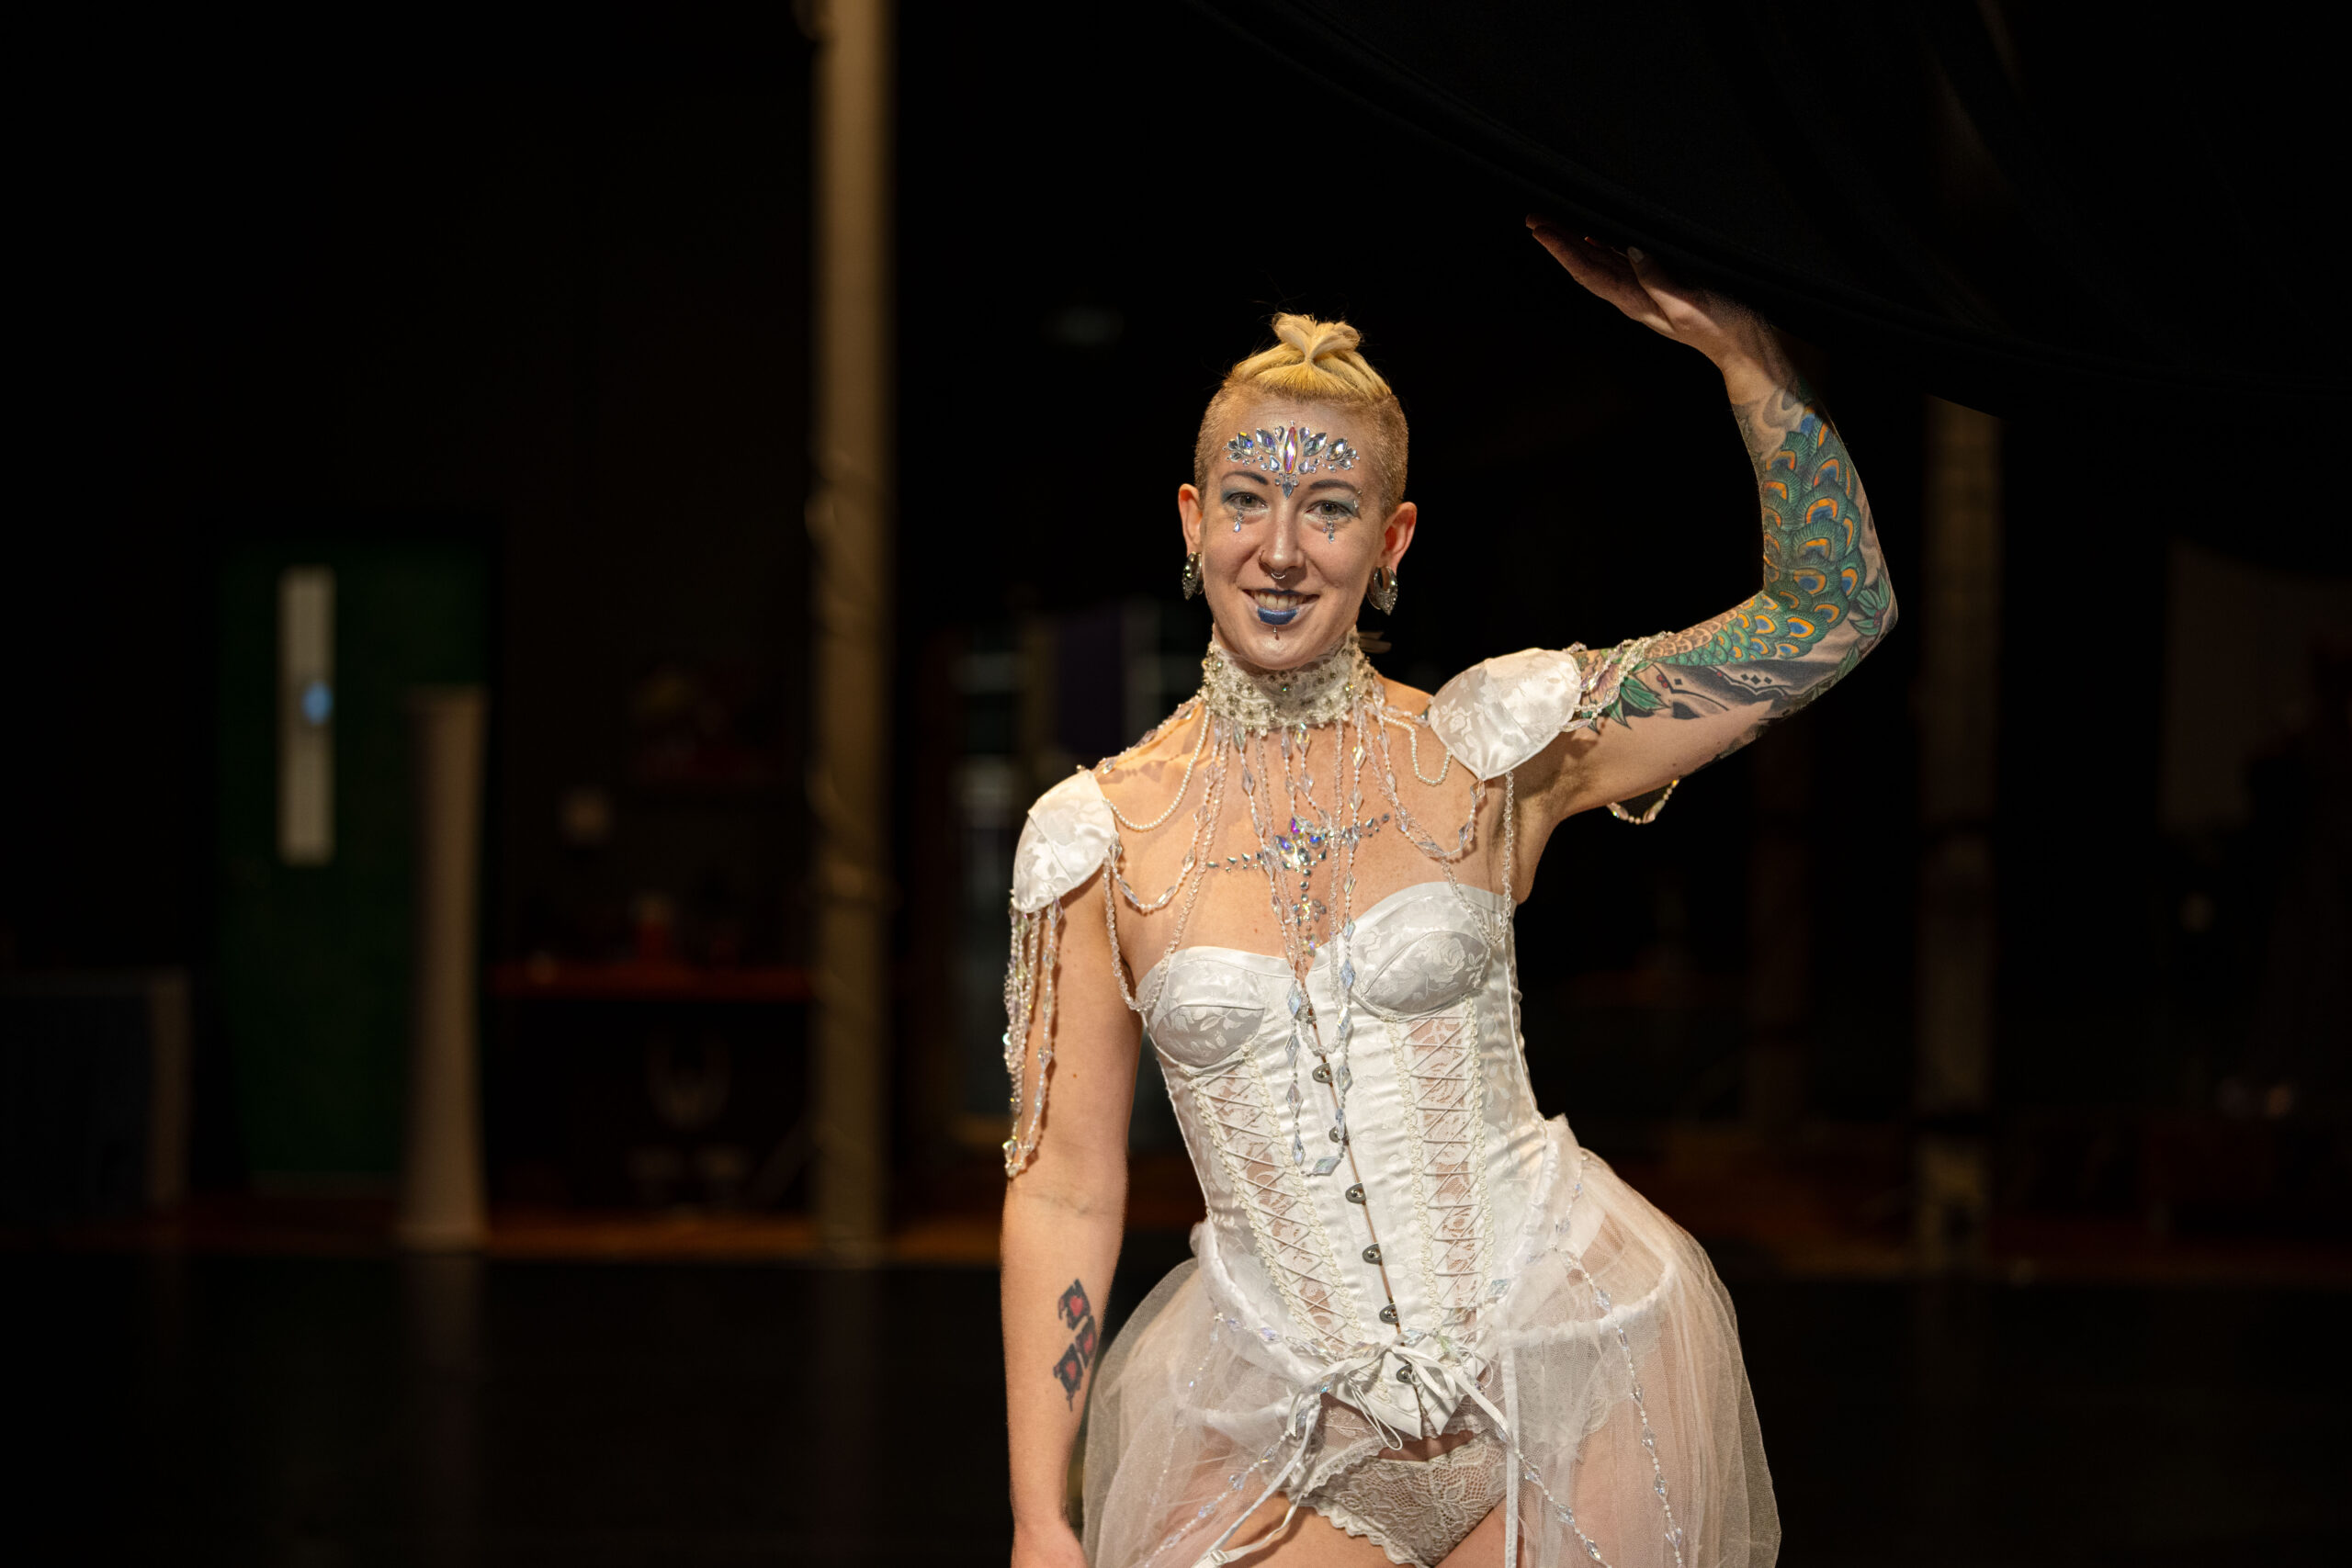 A woman with tattoos and blond hair in a white burlesque costume standing backstage.